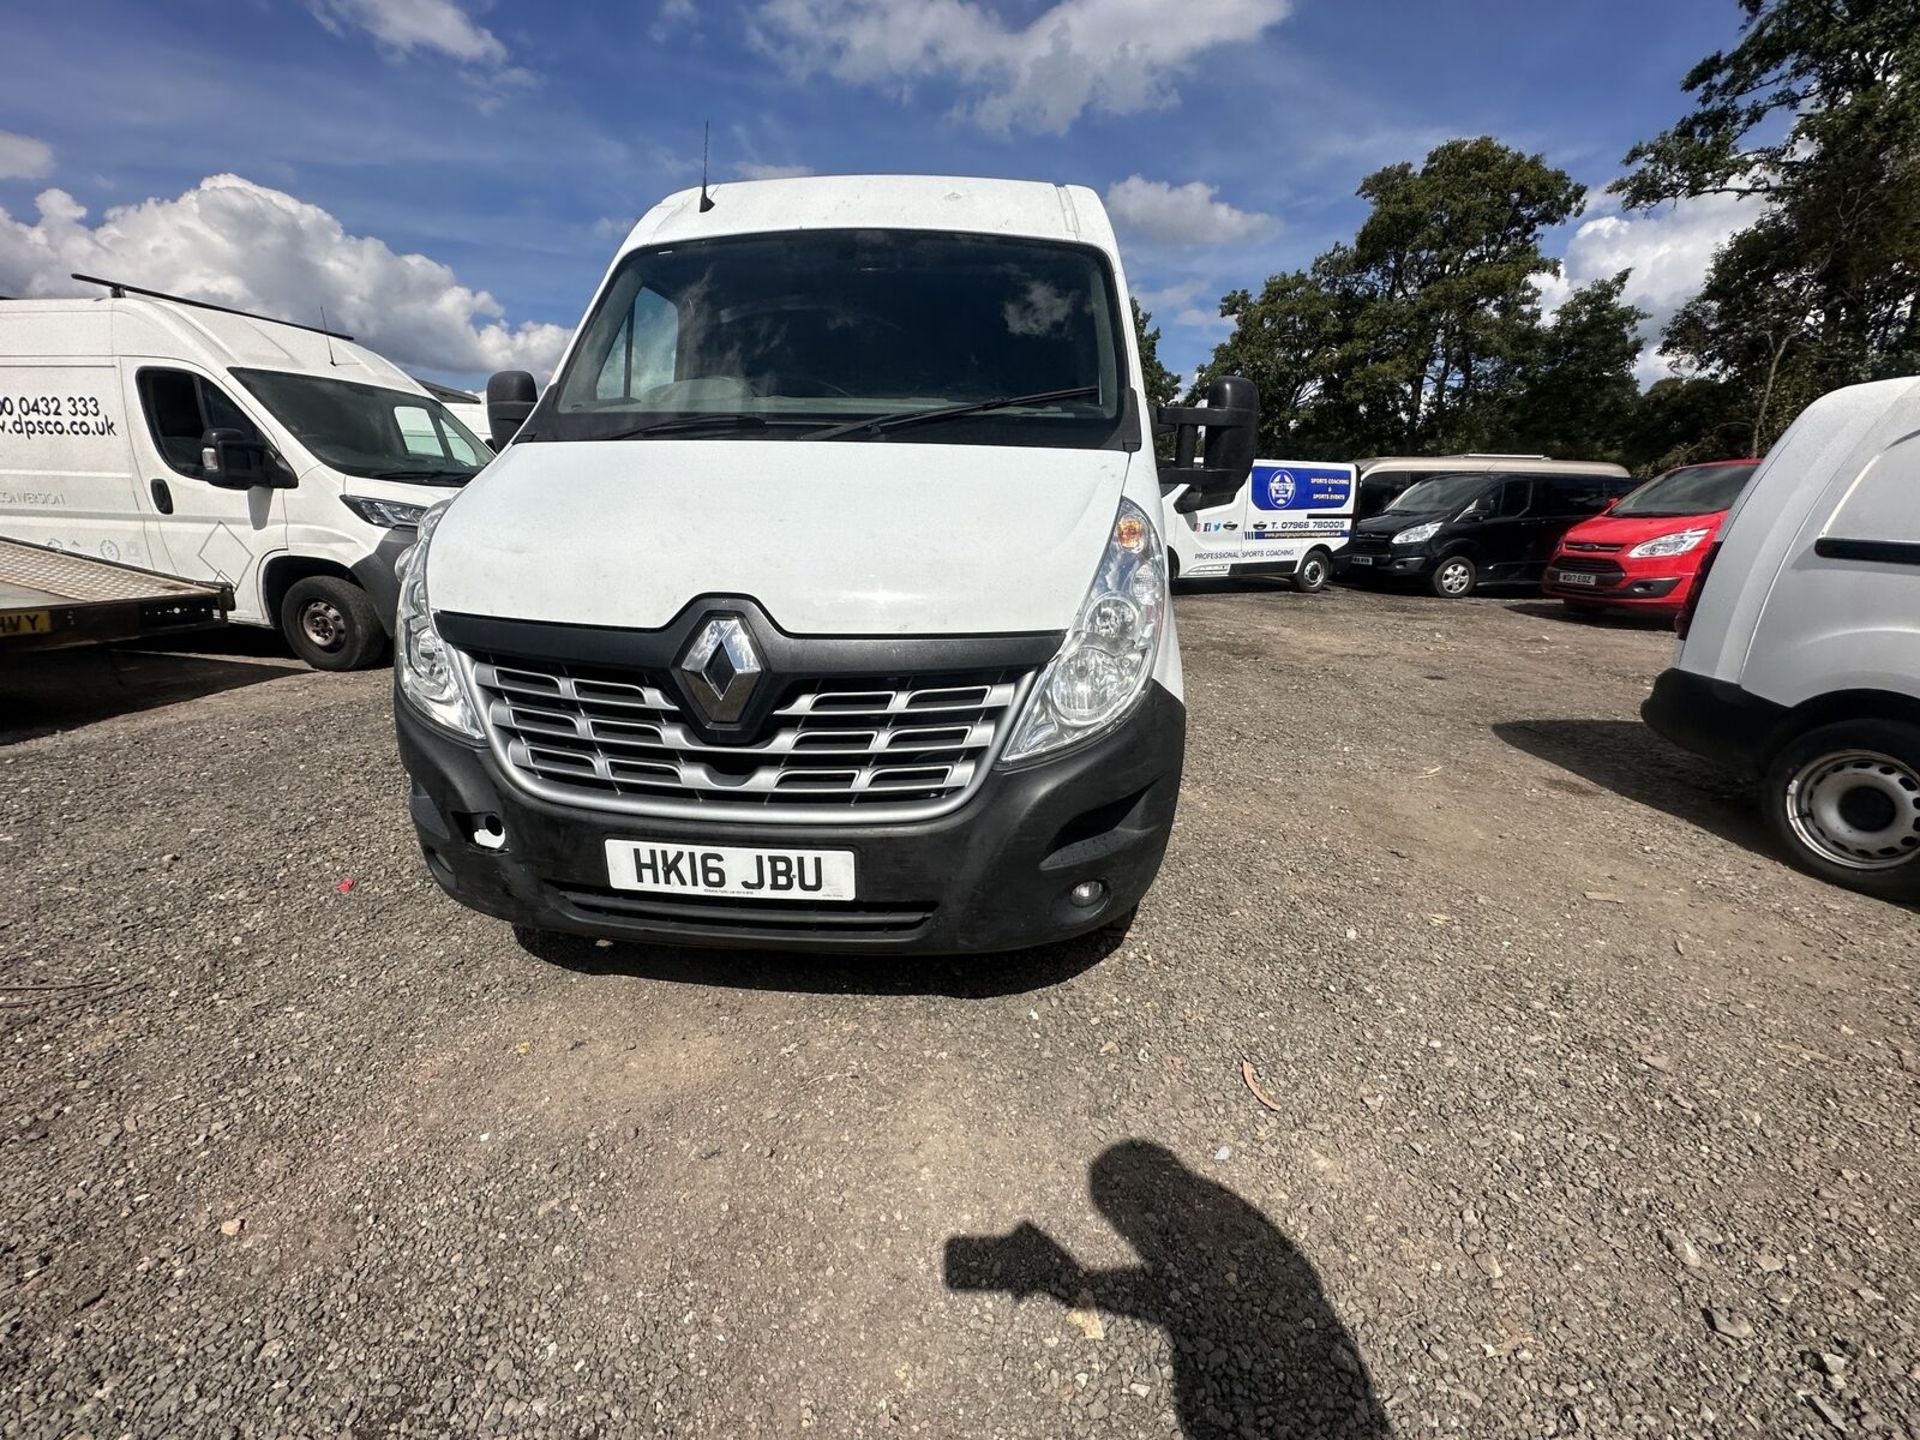 PRICED TO CLEAR - 2016 RENAULT MASTER LWB - (NO VAT ON HAMMER) - Image 3 of 14